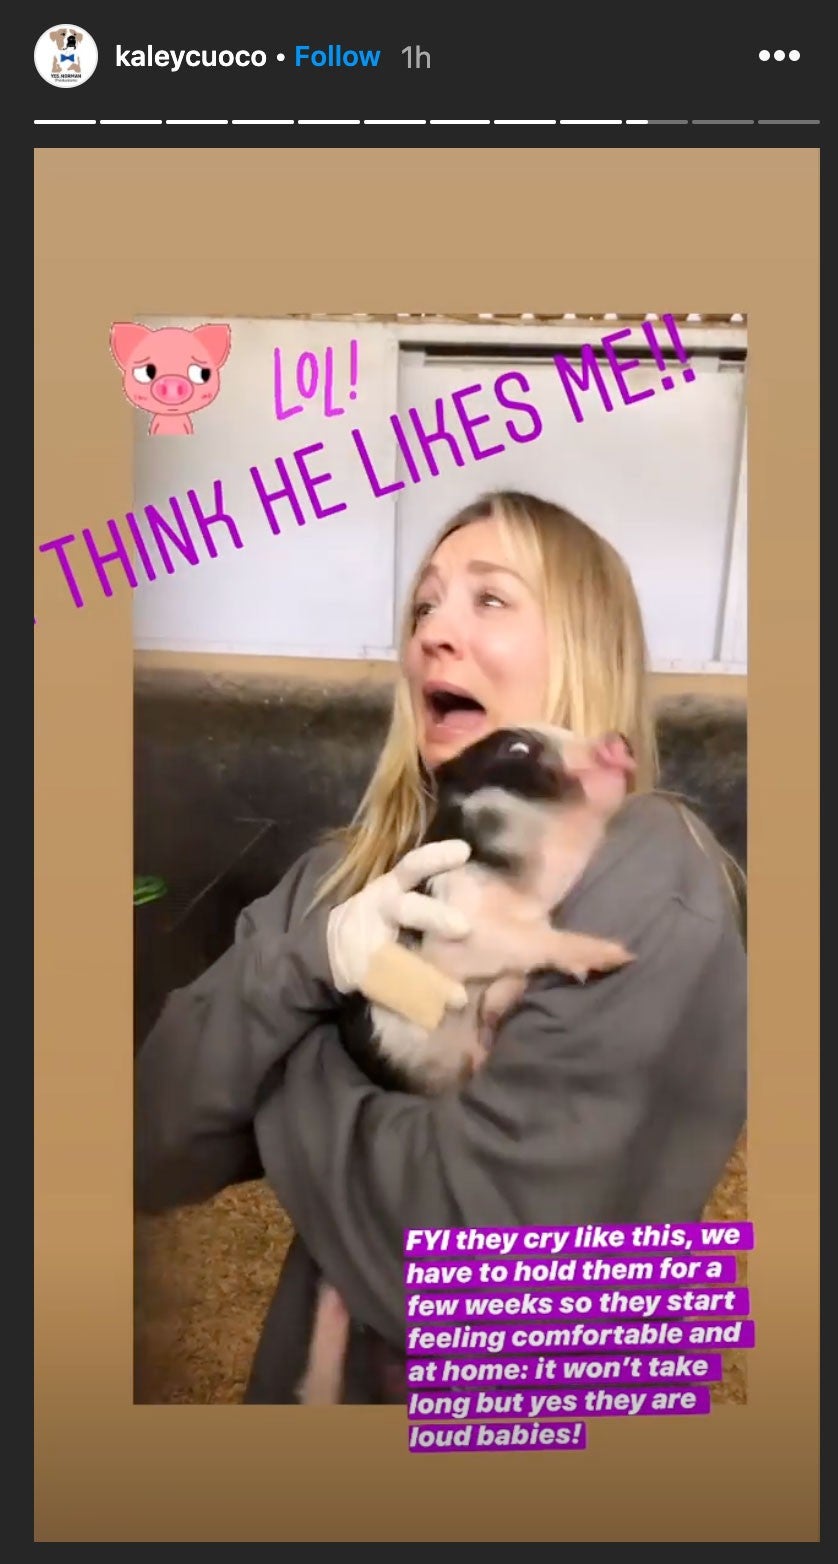 kaley cuoco with piglet